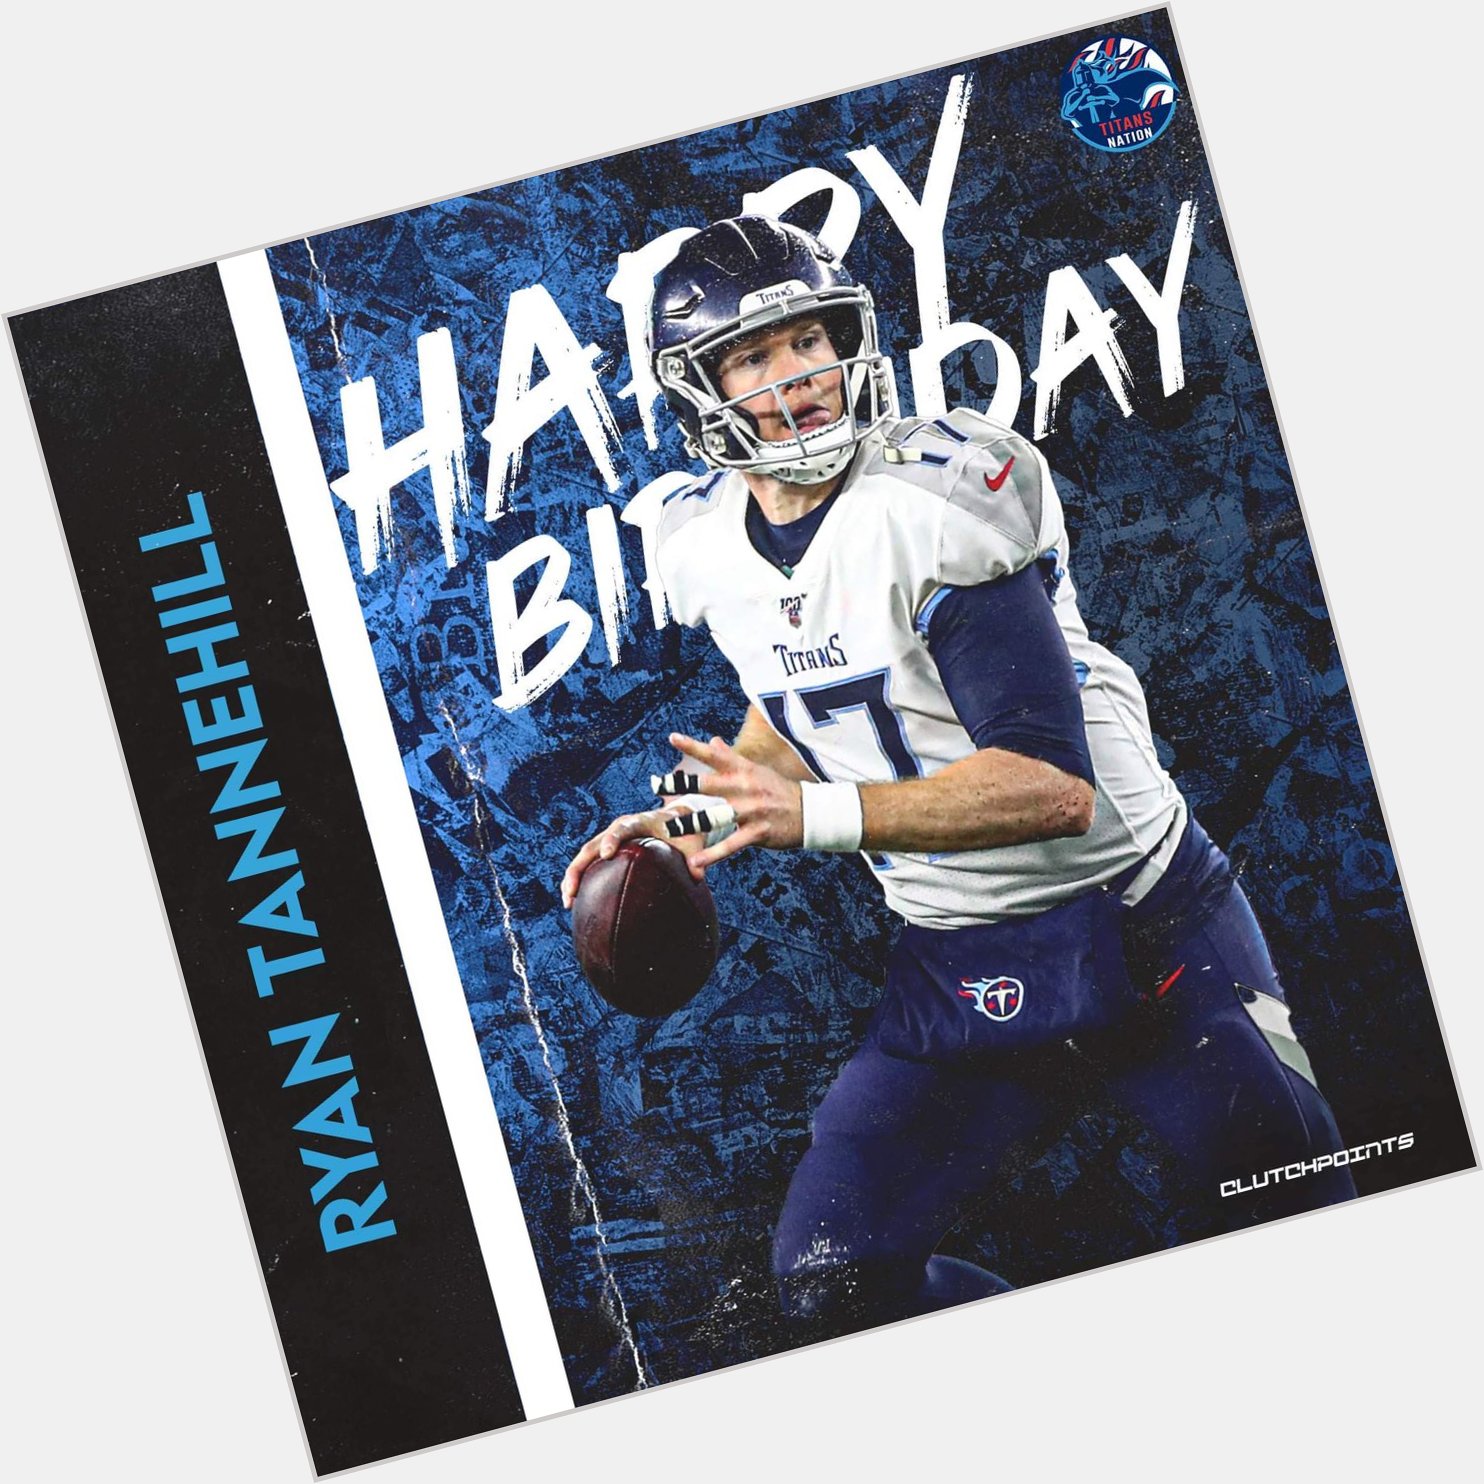 Join Titans Nation in greeting Pro Bowl Ryan Tannehill a happy 33rd birthday!  